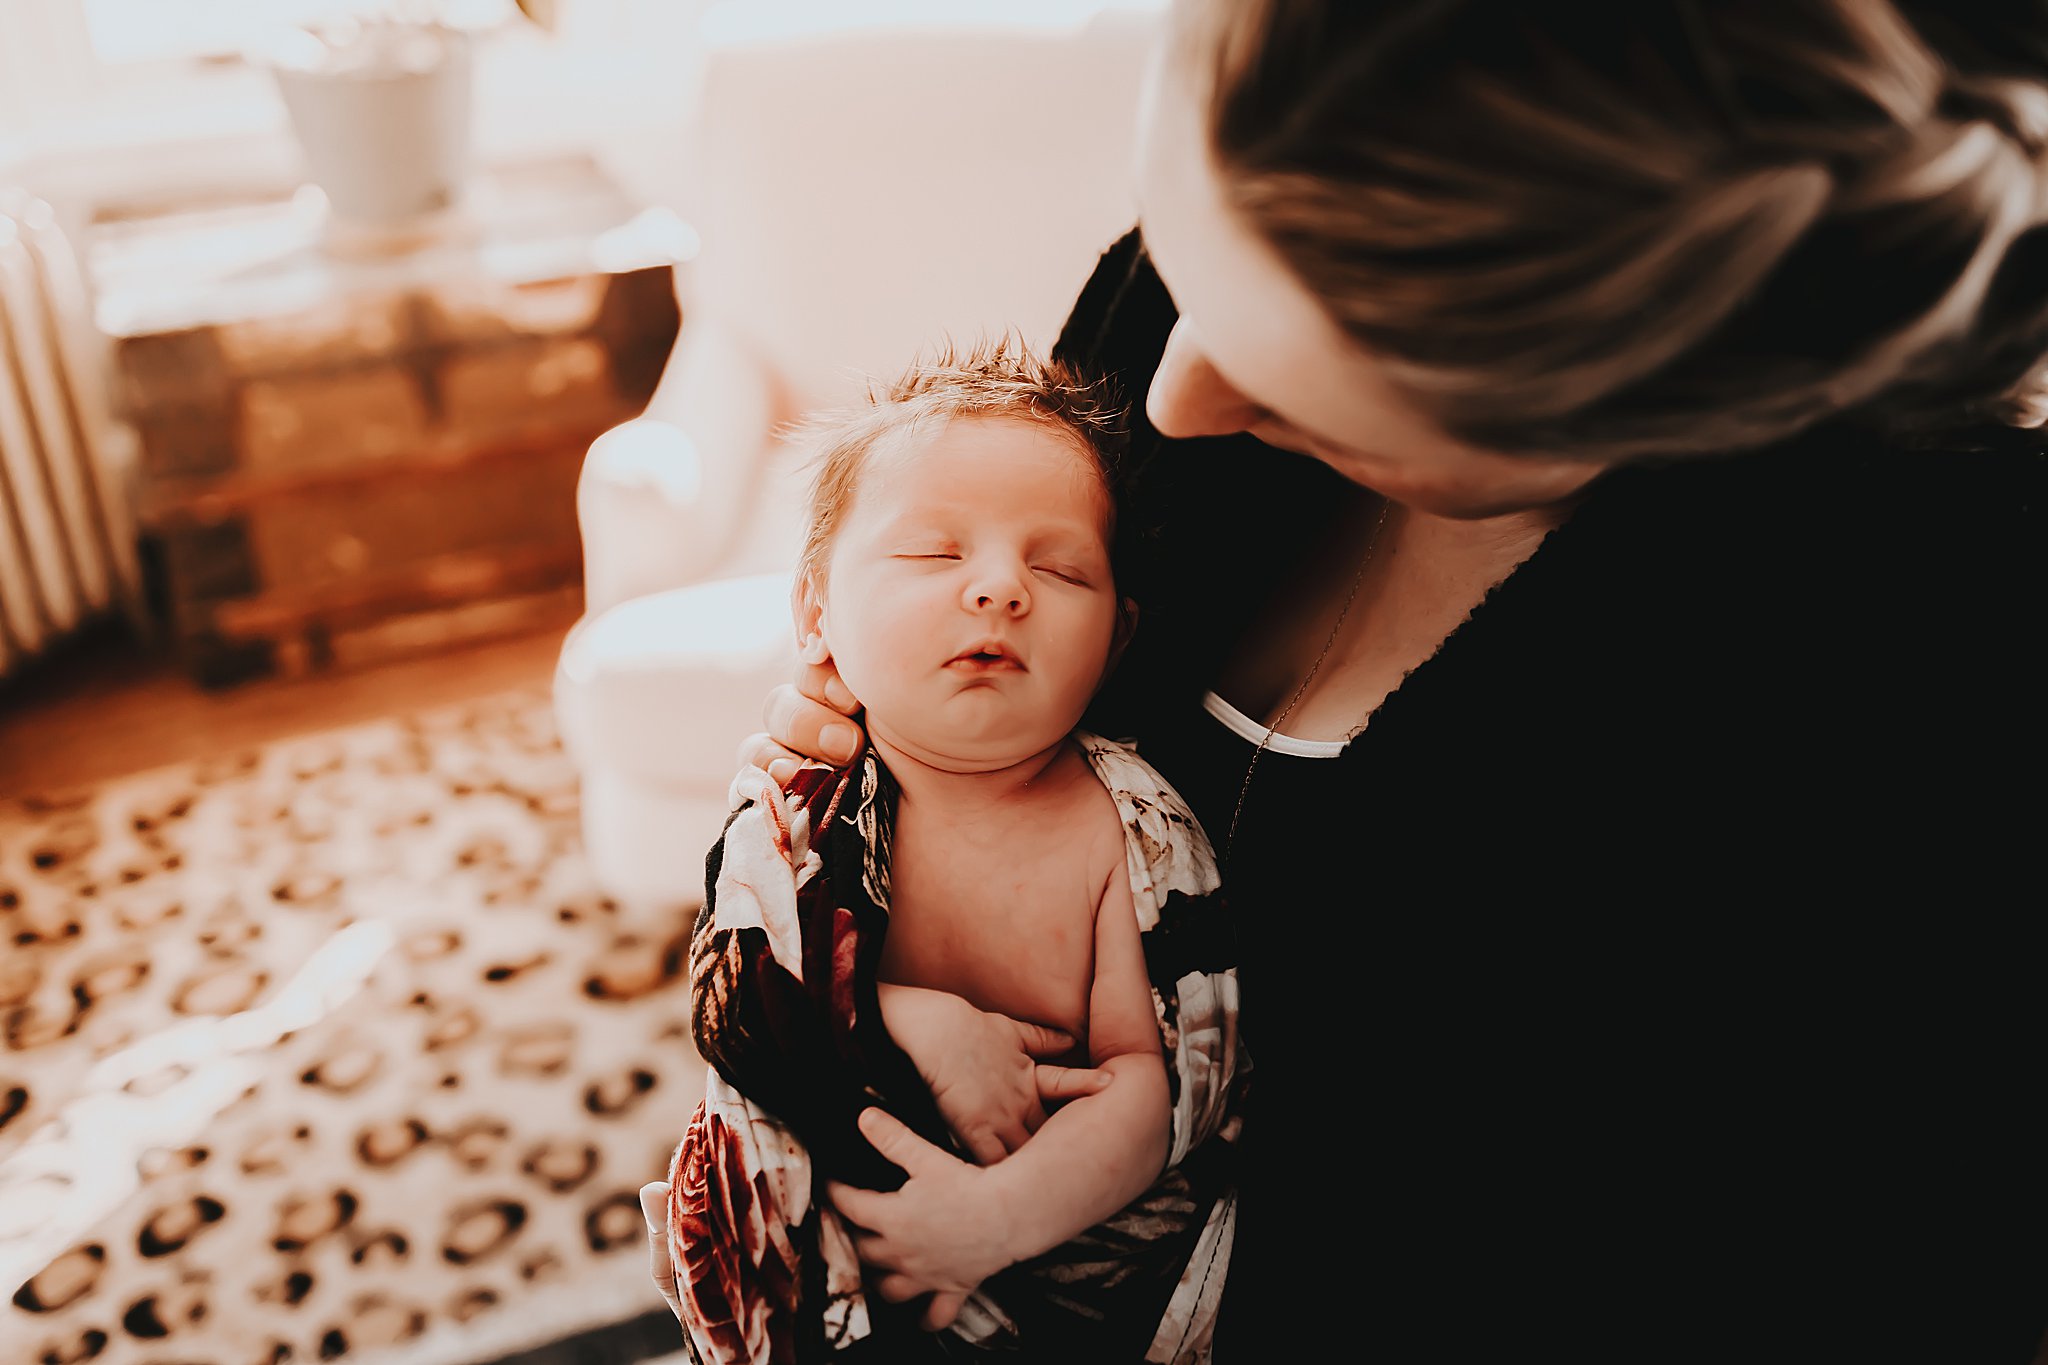 babyled newborn photographer lifestyle session Delaware County PA